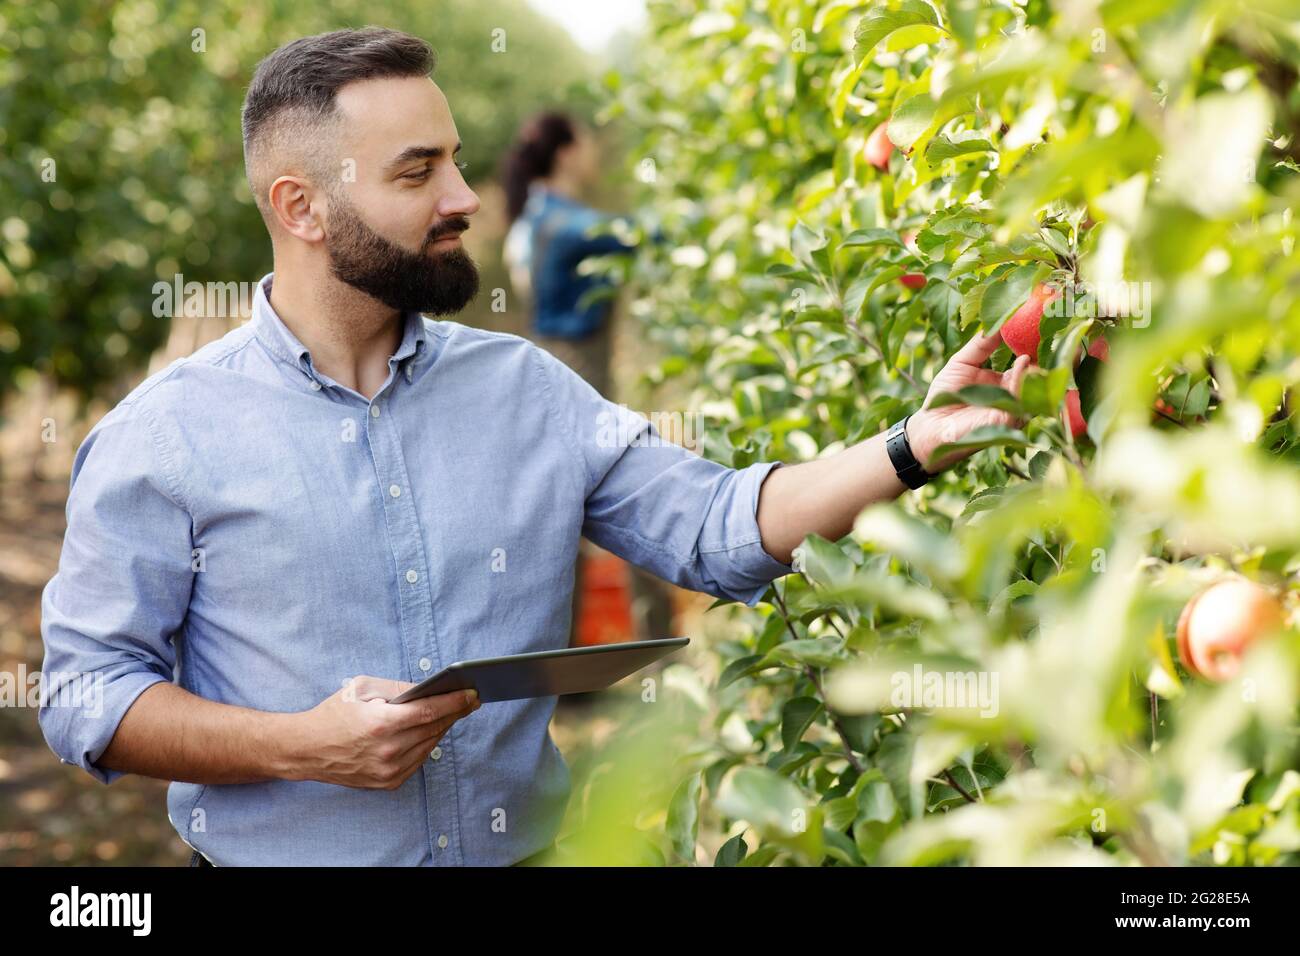 Control of fruit cultivation, check crop and management of eco farm with digital device Stock Photo